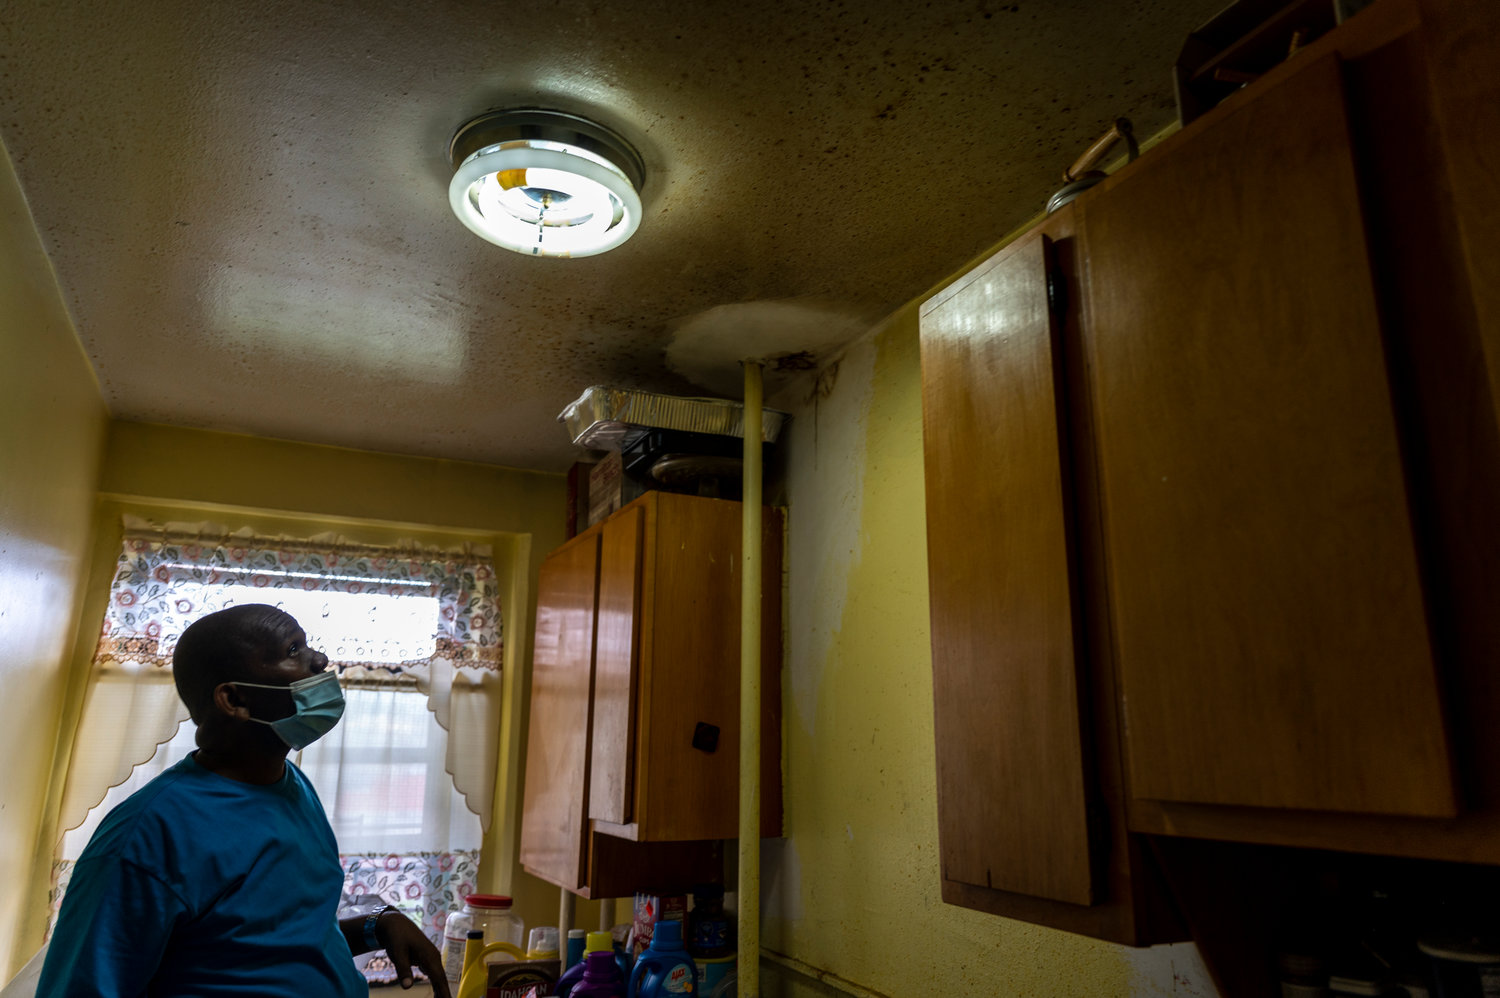 Addressing many long-term issues like water damage from constant leaks and poor sealing in Paulette Shomo’s apartment at Marble Hill Houses is something that might not be necessarily hurt by the fact three different councilman represent a single community — but it probably doesn’t help much either.